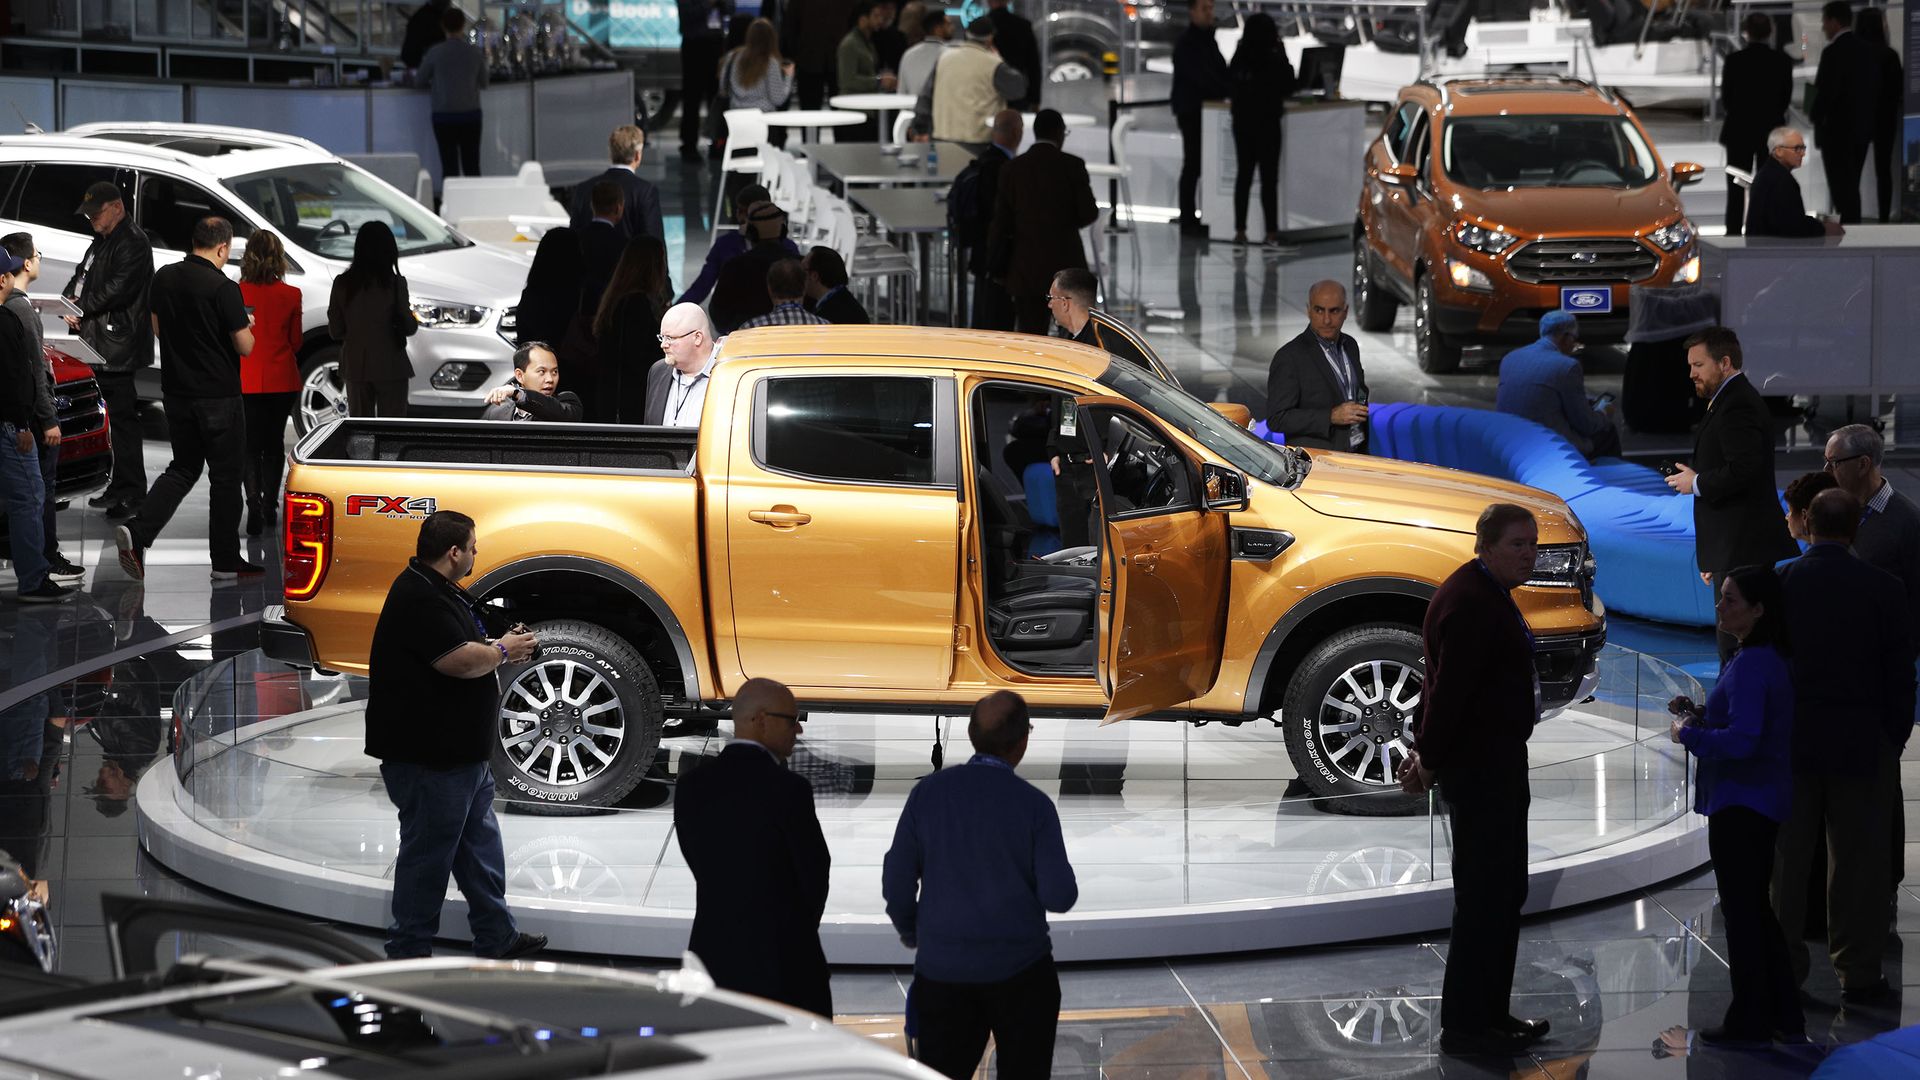 A truck amongst a crowd of people at the Detroit Auto Show